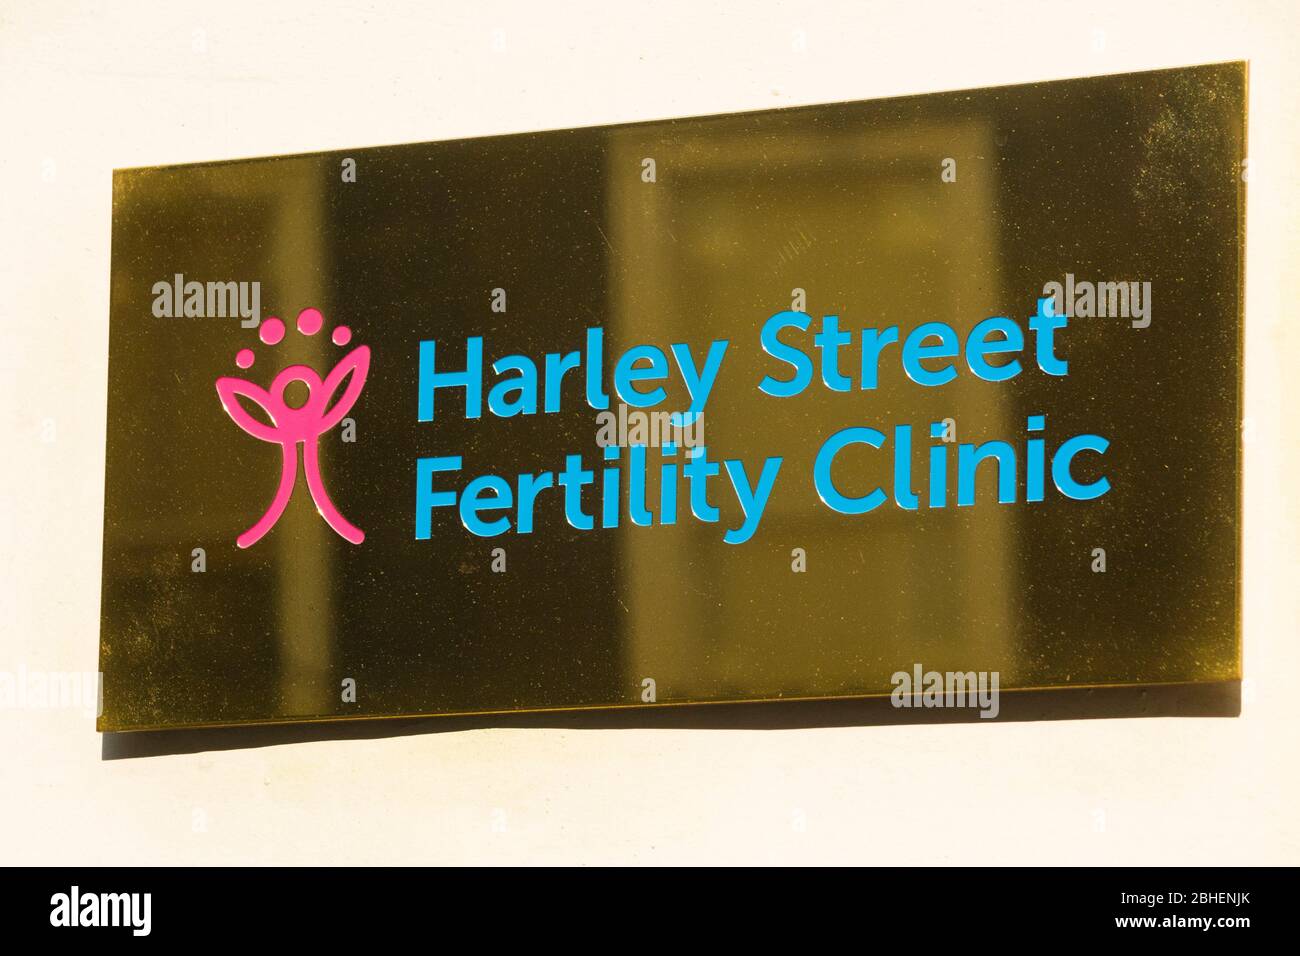 Brass sign for Fertility Clinic – The Harley Street Fertility Clinic – outside medical consulting offices / rooms in Harley Street, London. UK. (118) Stock Photo